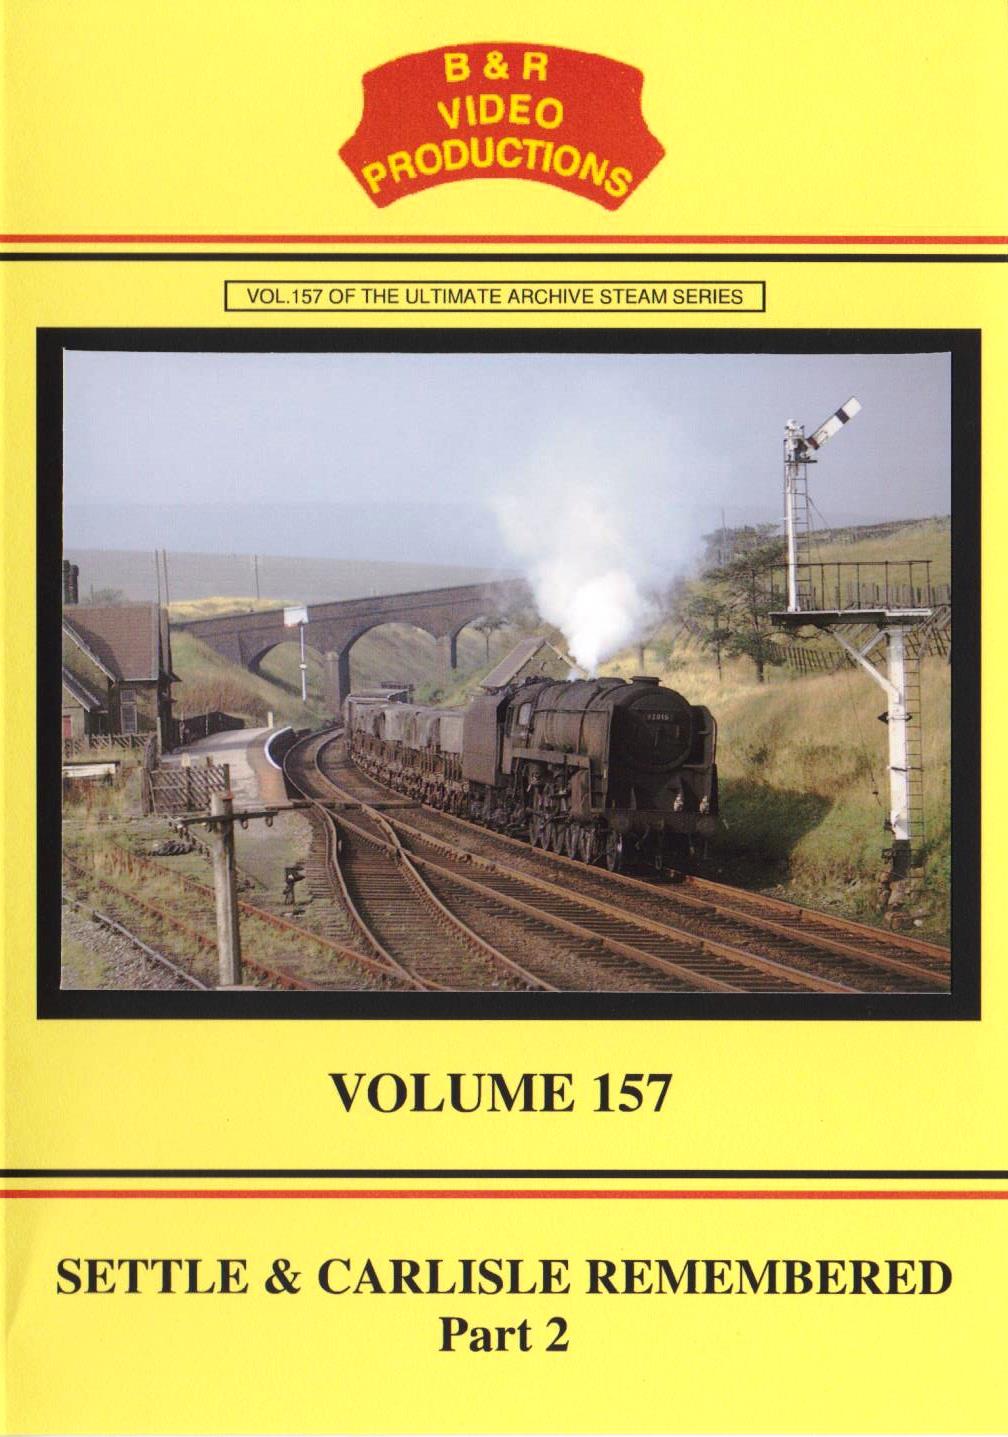 B & R Video Productions Vol 157 - Settle & Carlisle remembered (Part 2)